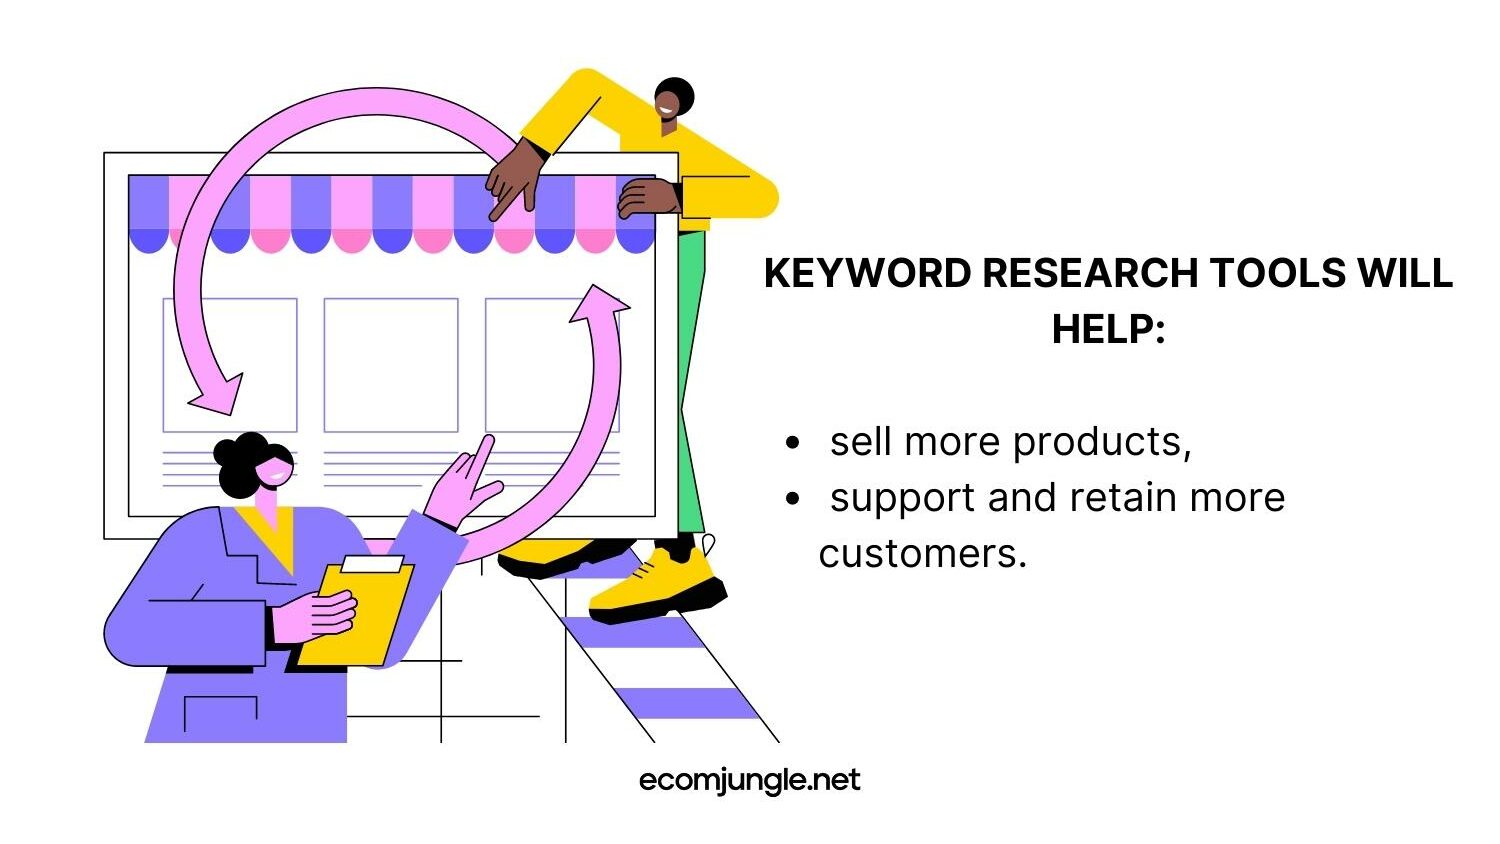 Use keyword research tools to sell more products